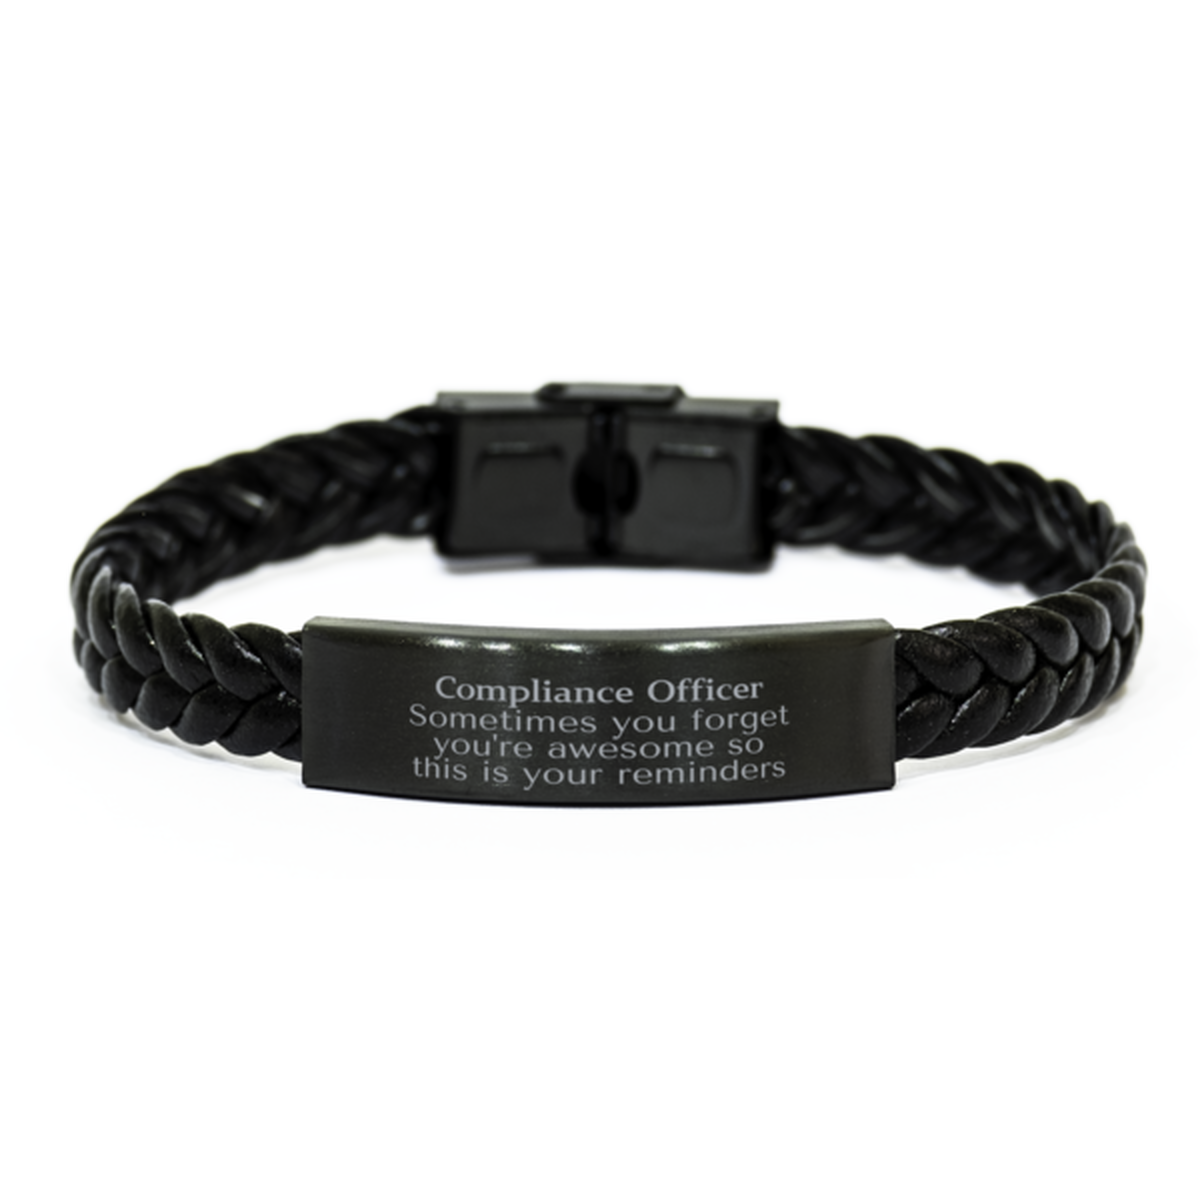 Sentimental Compliance Officer Braided Leather Bracelet, Compliance Officer Sometimes you forget you're awesome so this is your reminders, Graduation Christmas Birthday Gifts for Compliance Officer, Men, Women, Coworkers